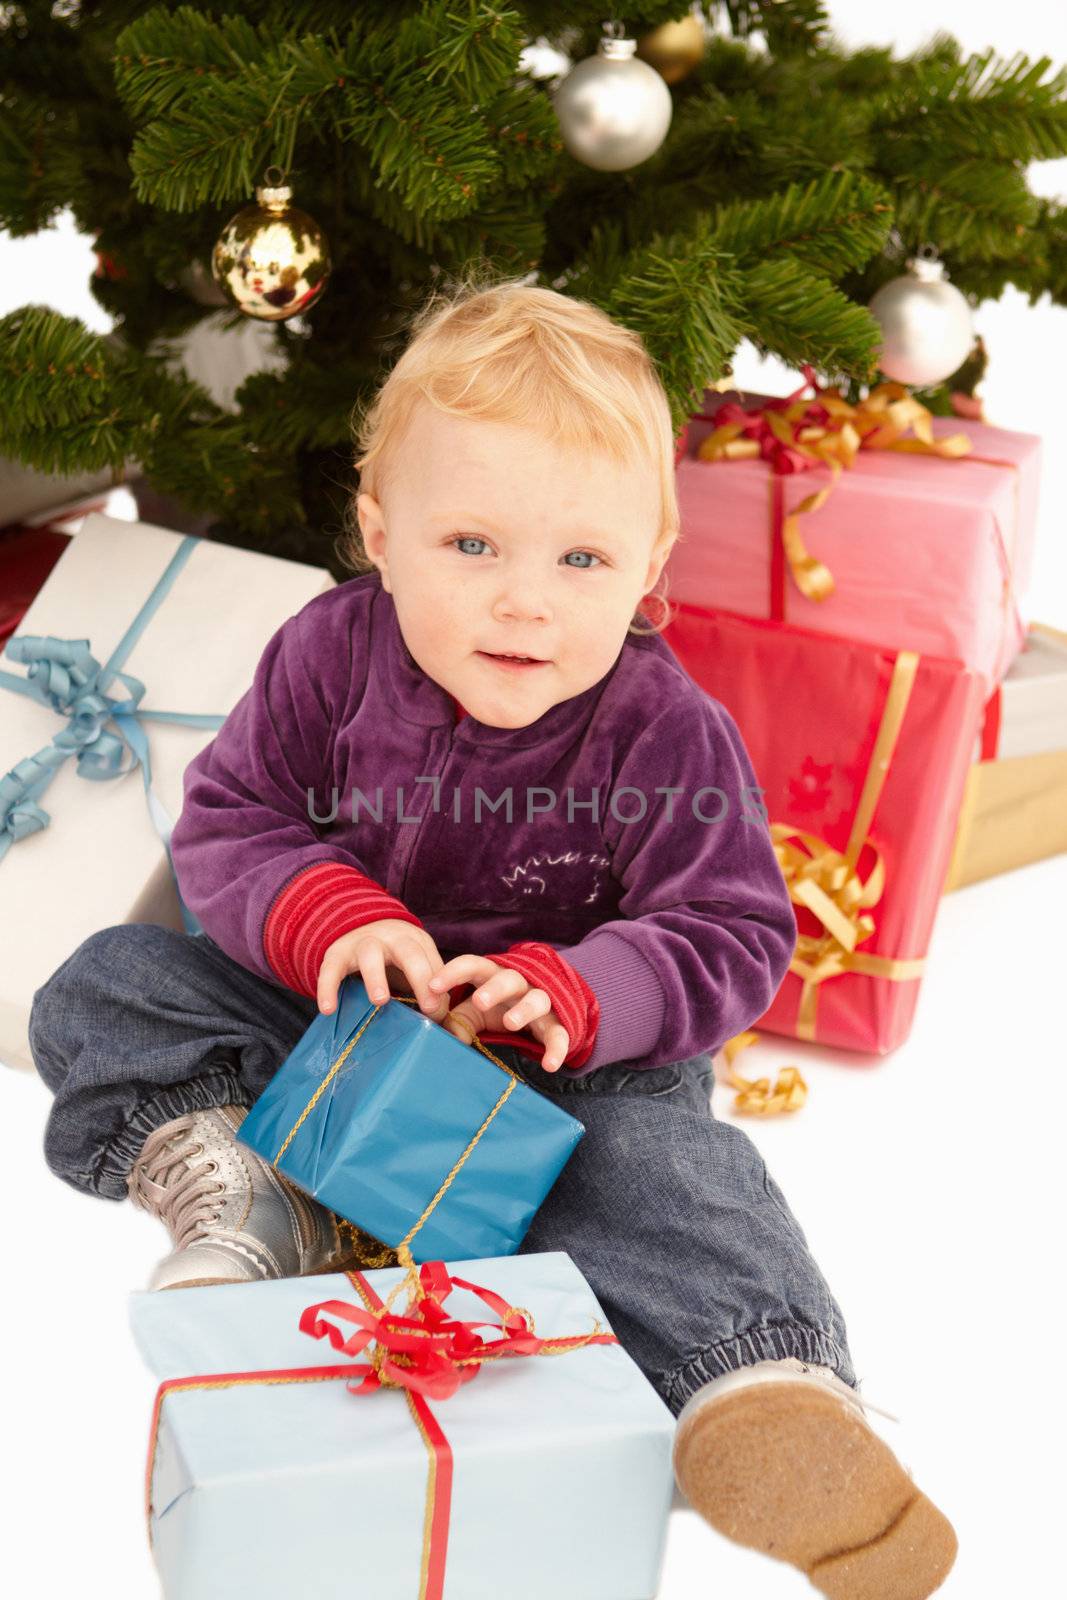 Christmas - Cute child opening gifts on x-mas day